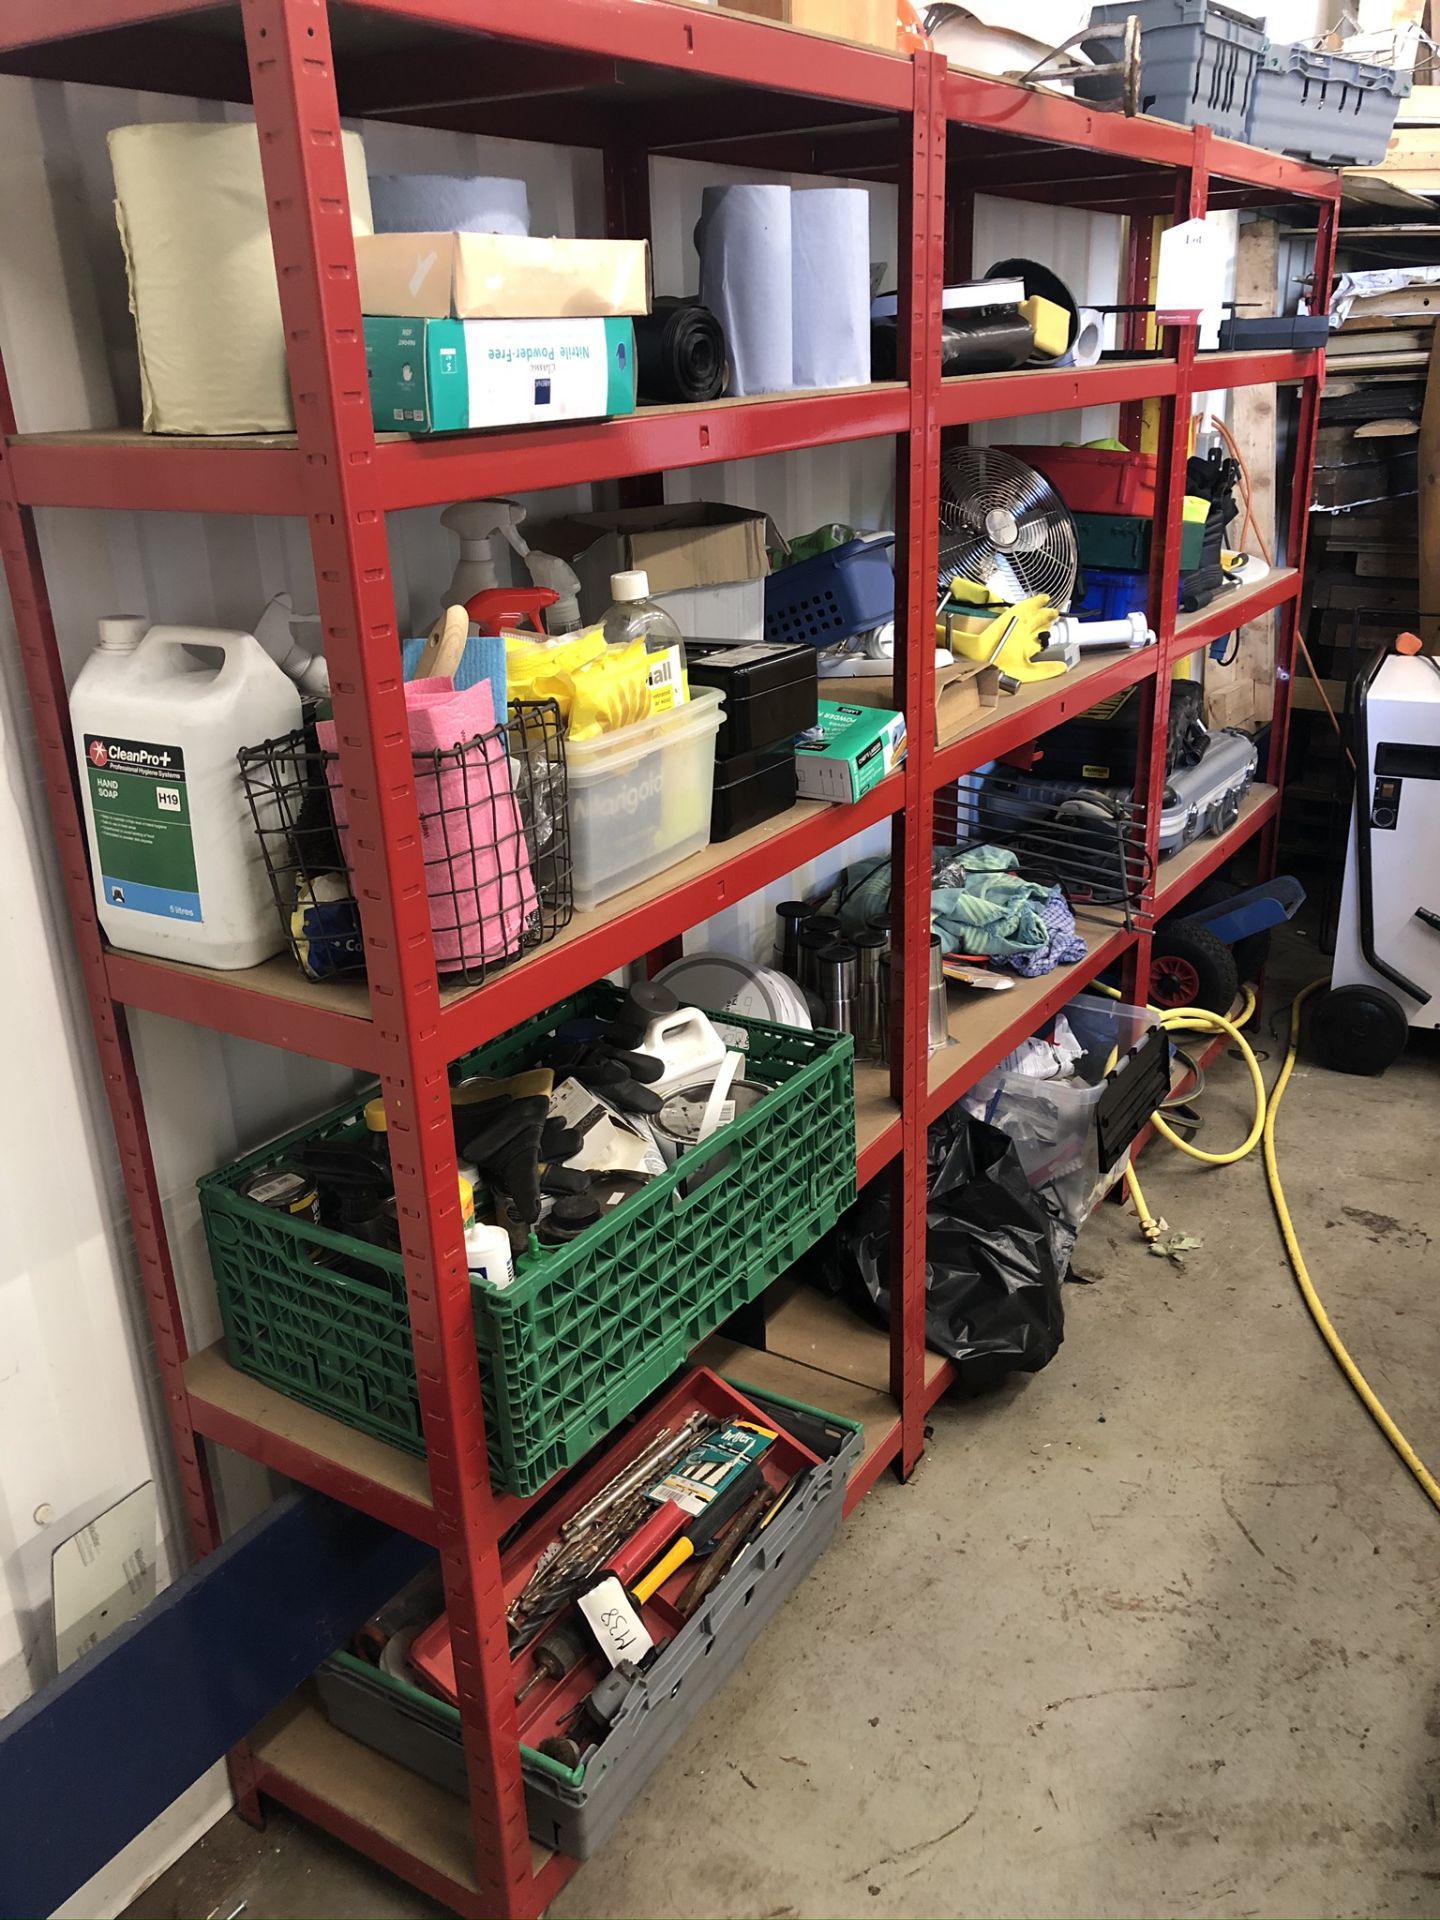 3 x Bays of Light Duty Shelving w/ Contents - As Per Photographs